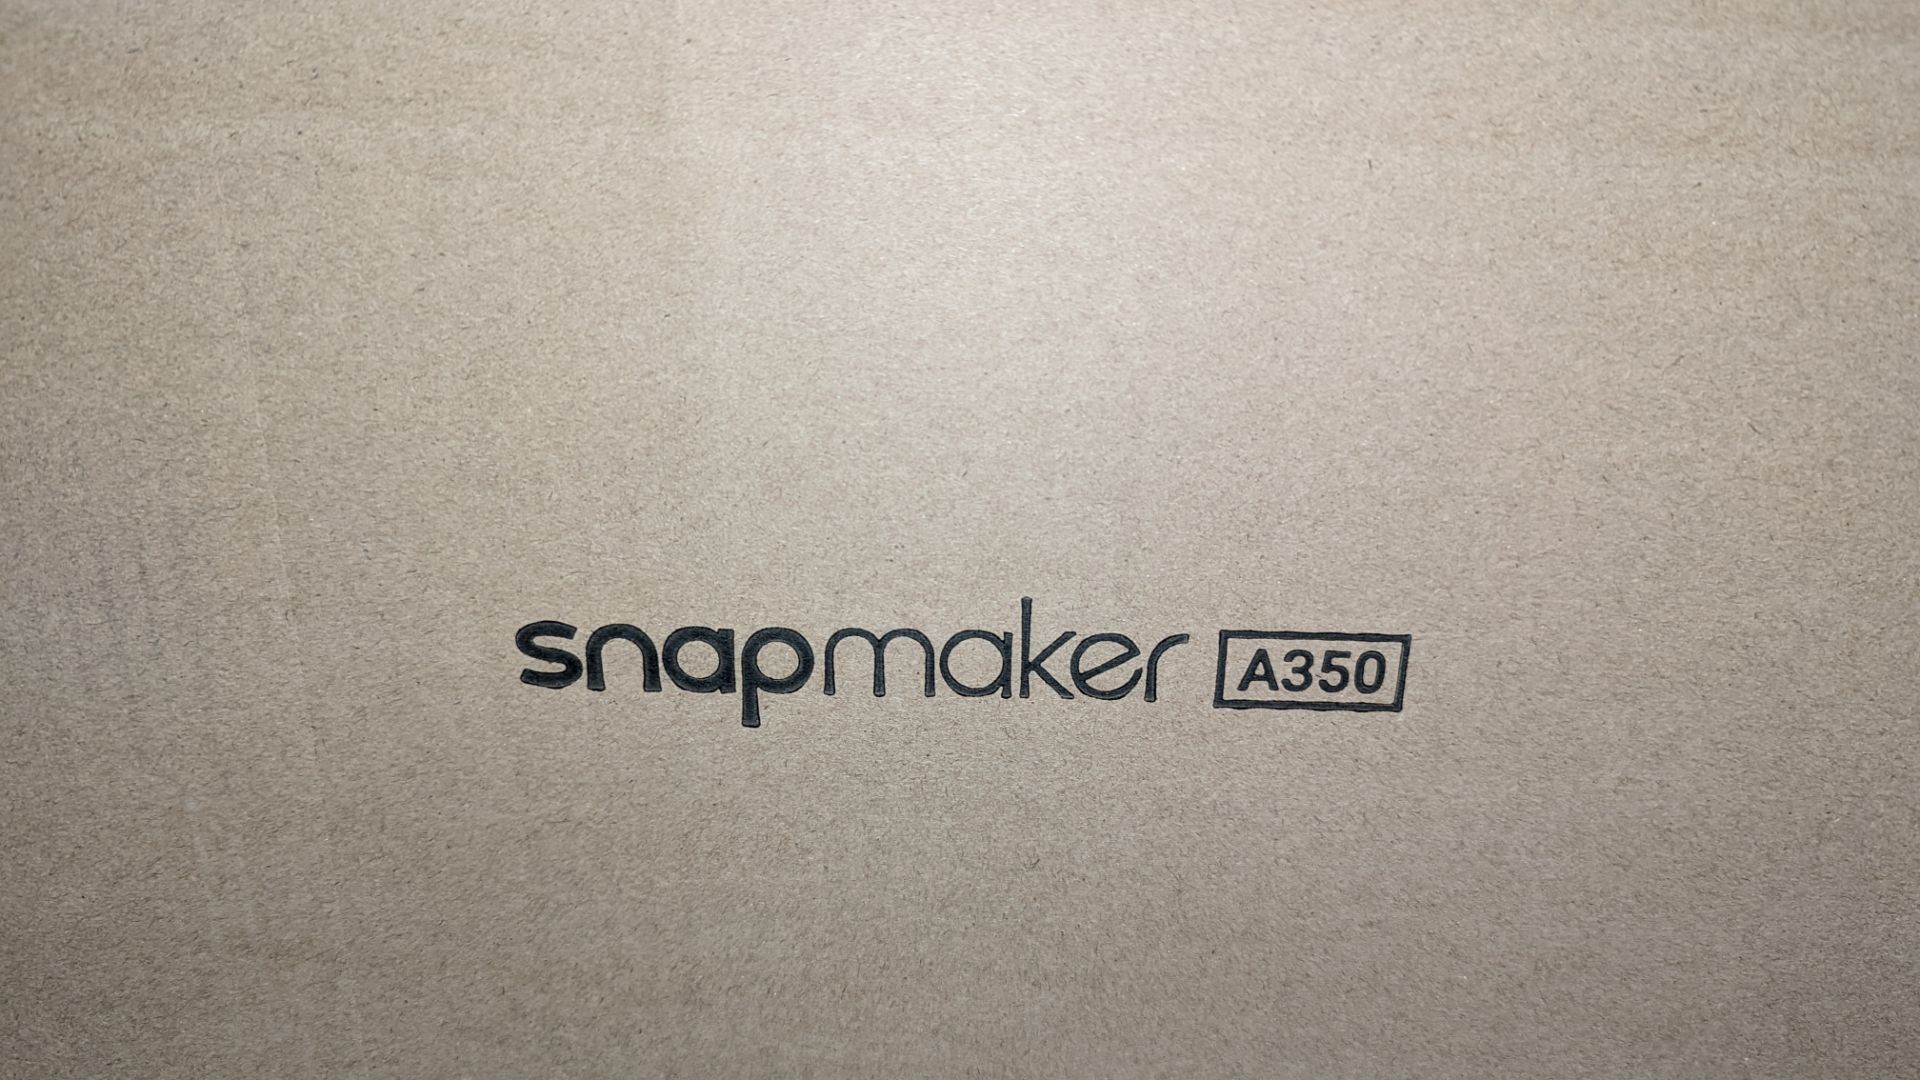 Snapmaker model A350 3D printer - boxed, delivered with original banding, assumed to be new/unused - Image 3 of 3